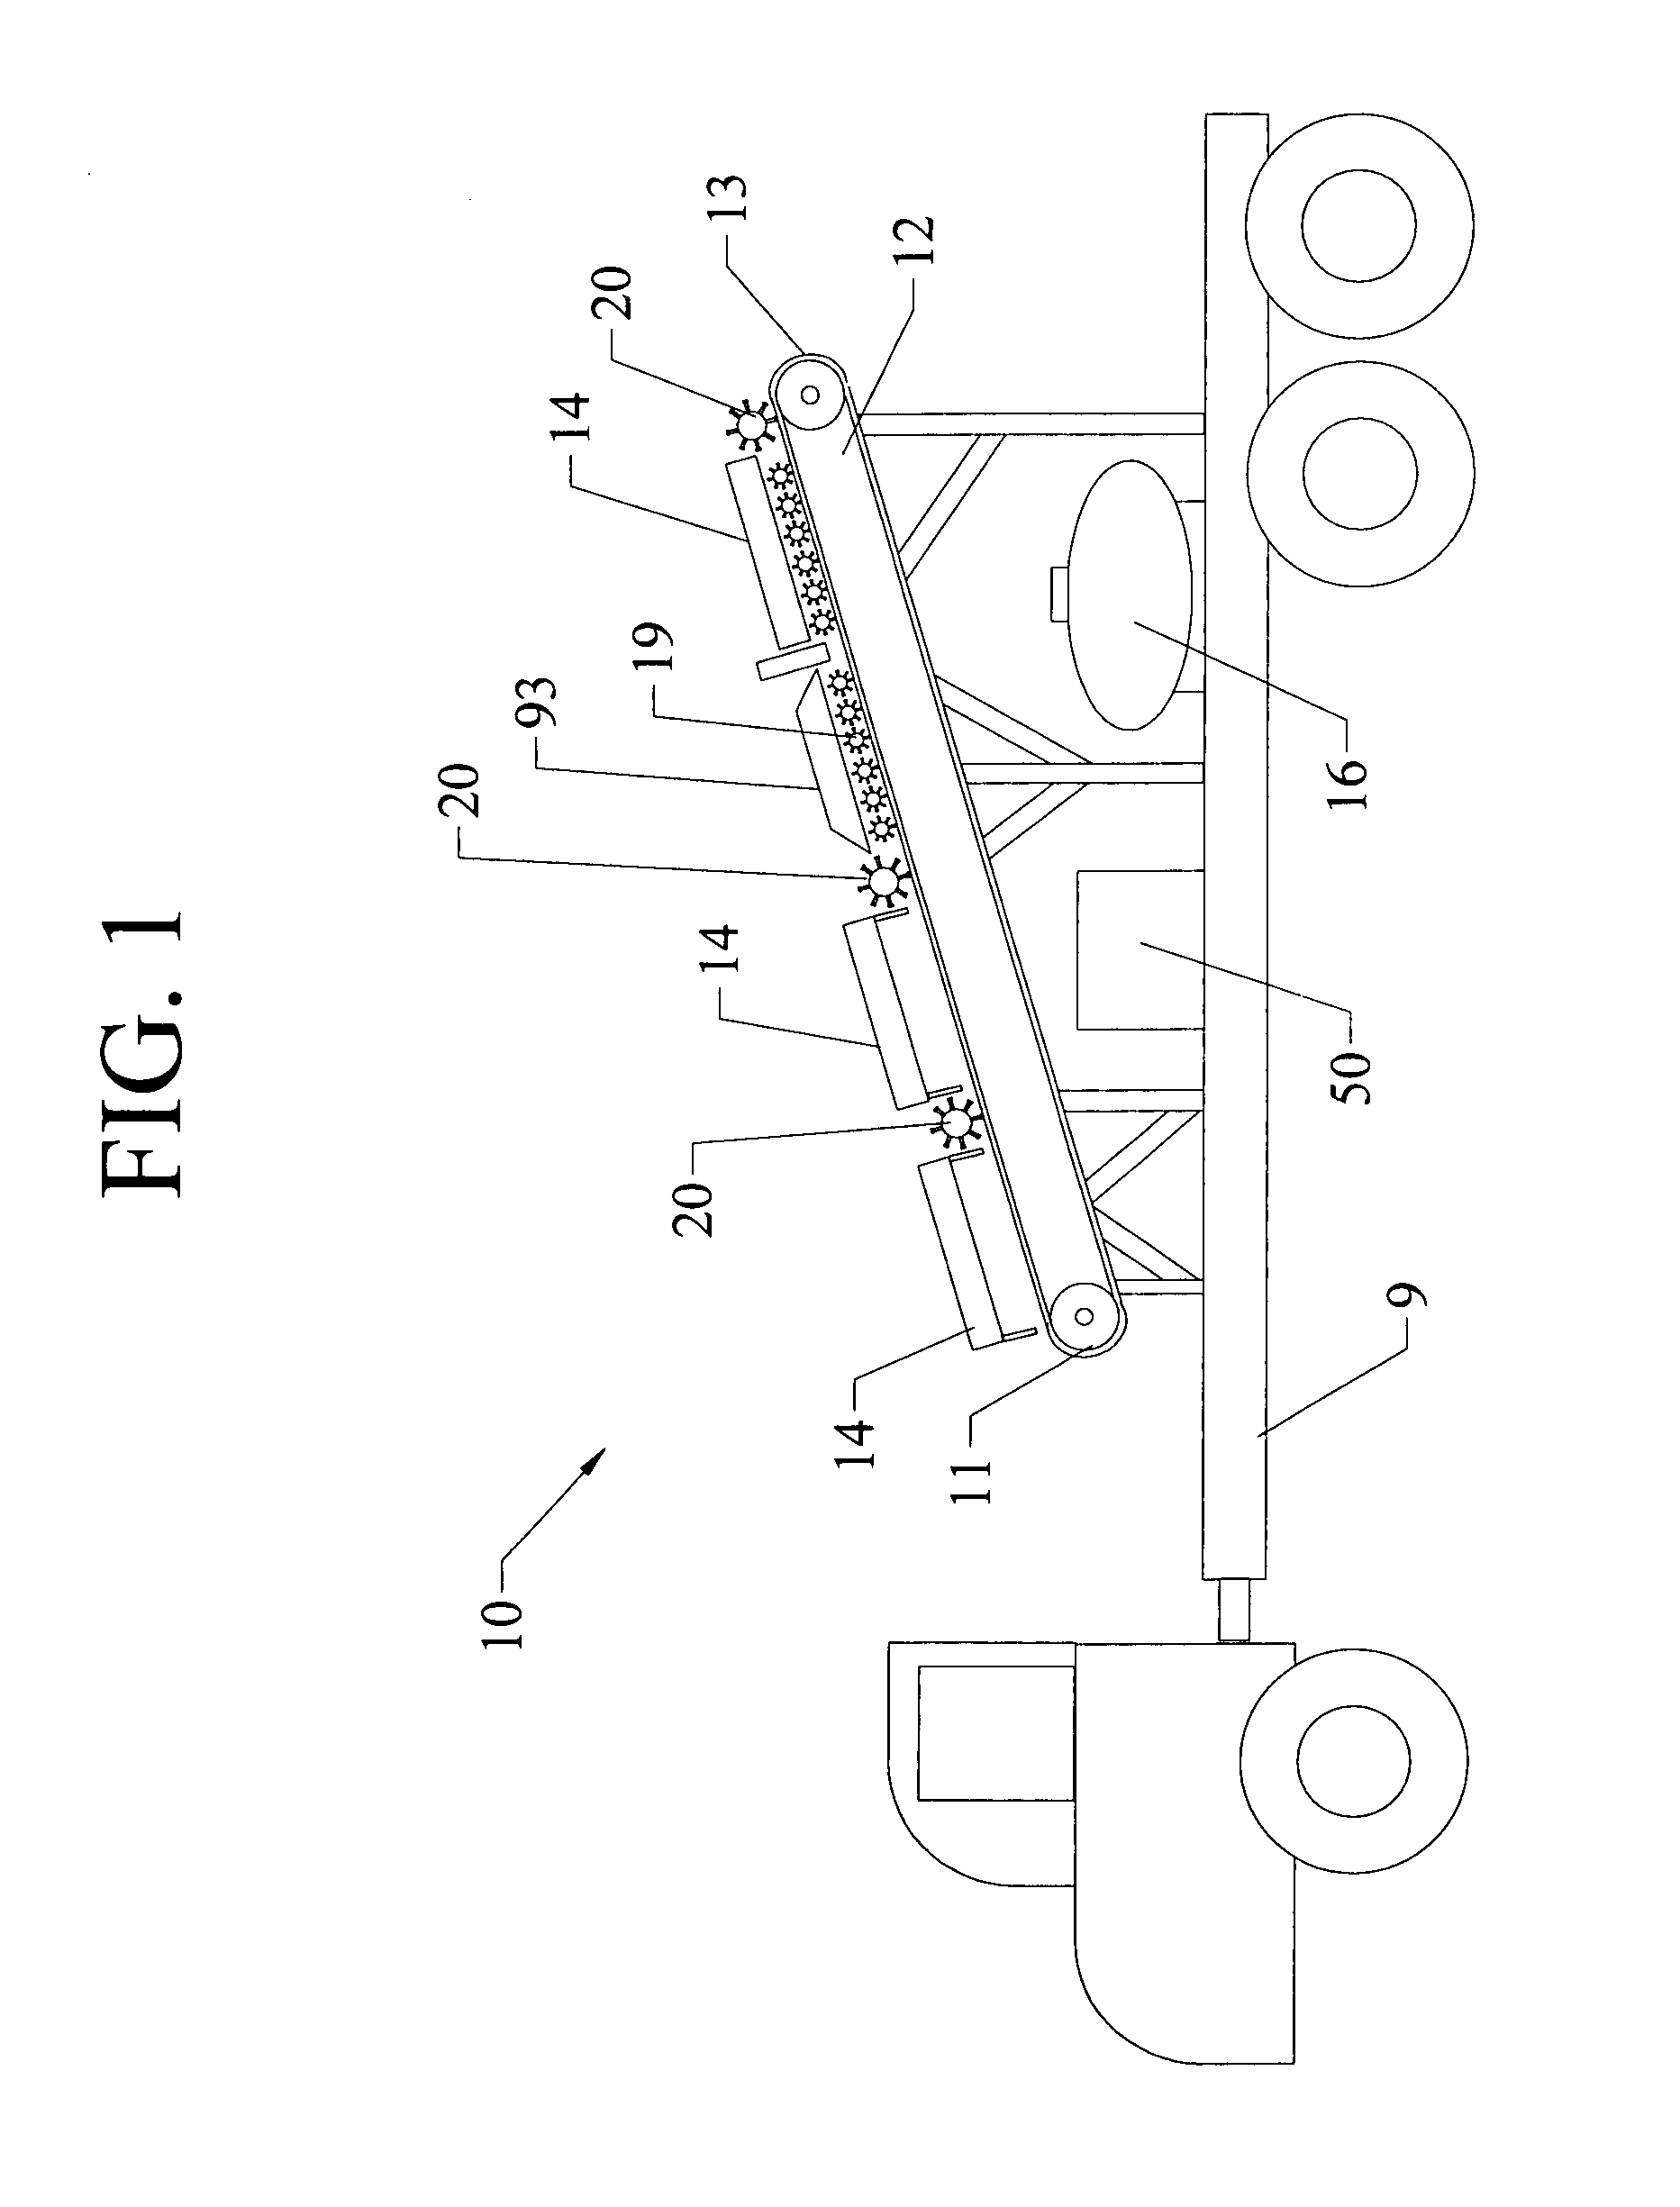 Aggregate pre-heating systemsand method